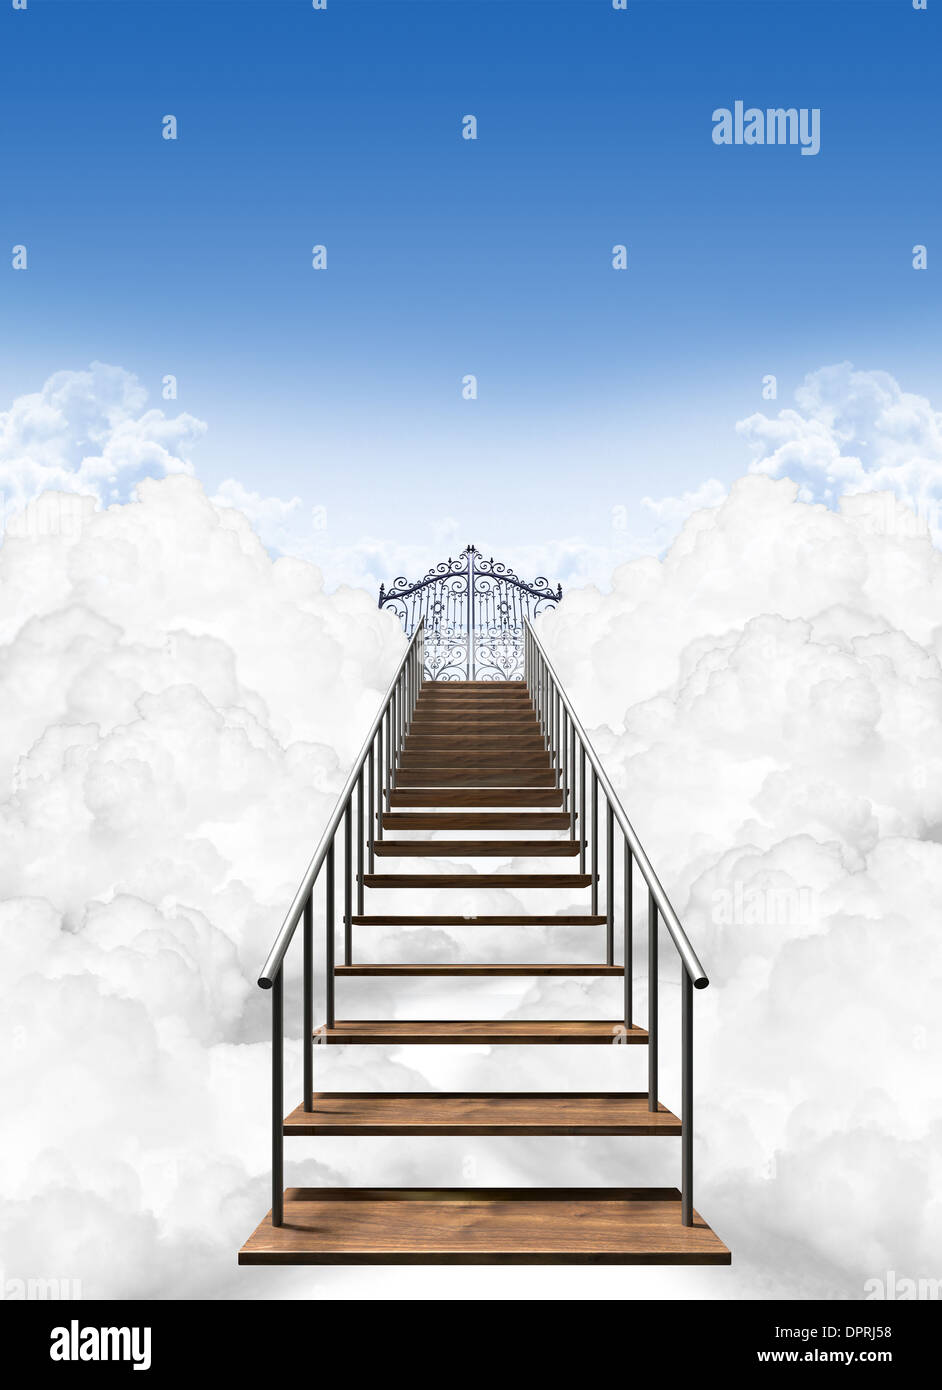 A depiction of the stairway to heavens pearly gates above the clouds on a  clear blue sky background Stock Photo - Alamy